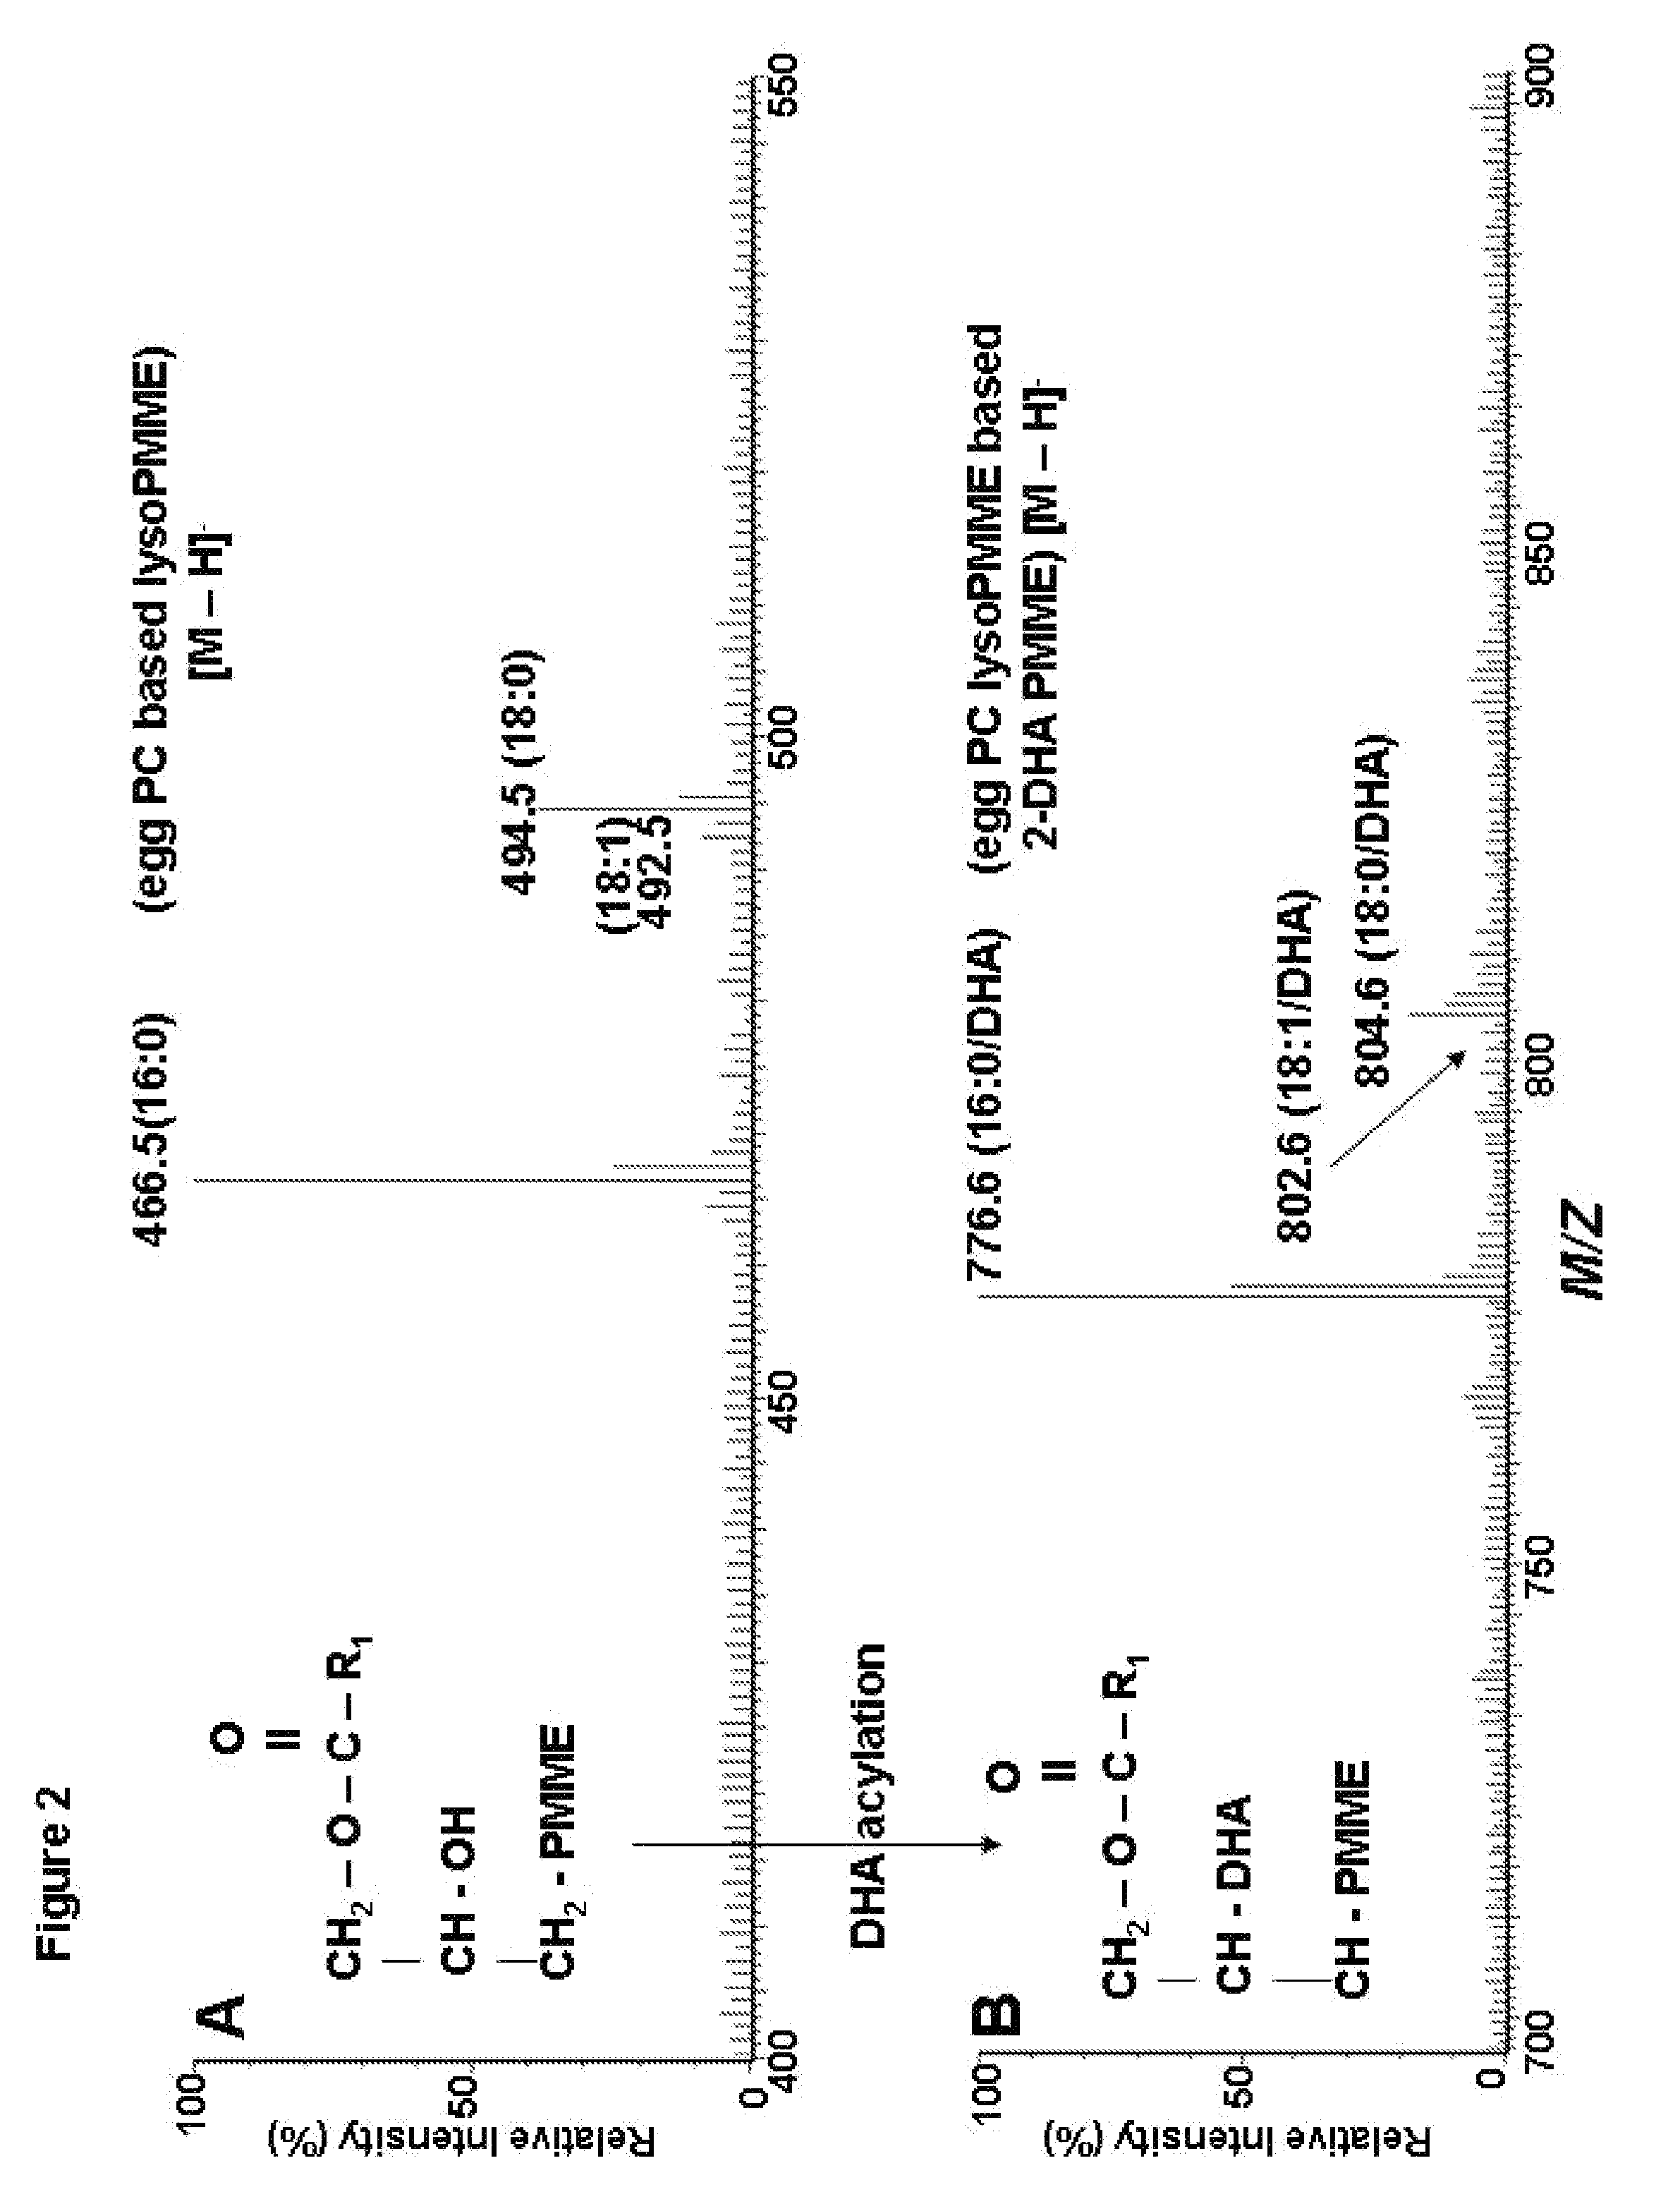 Composition and method for promoting survival of aged basal forebrain cholinergic neuron leading to provention and treatment of age-related neurodegenerative disorder